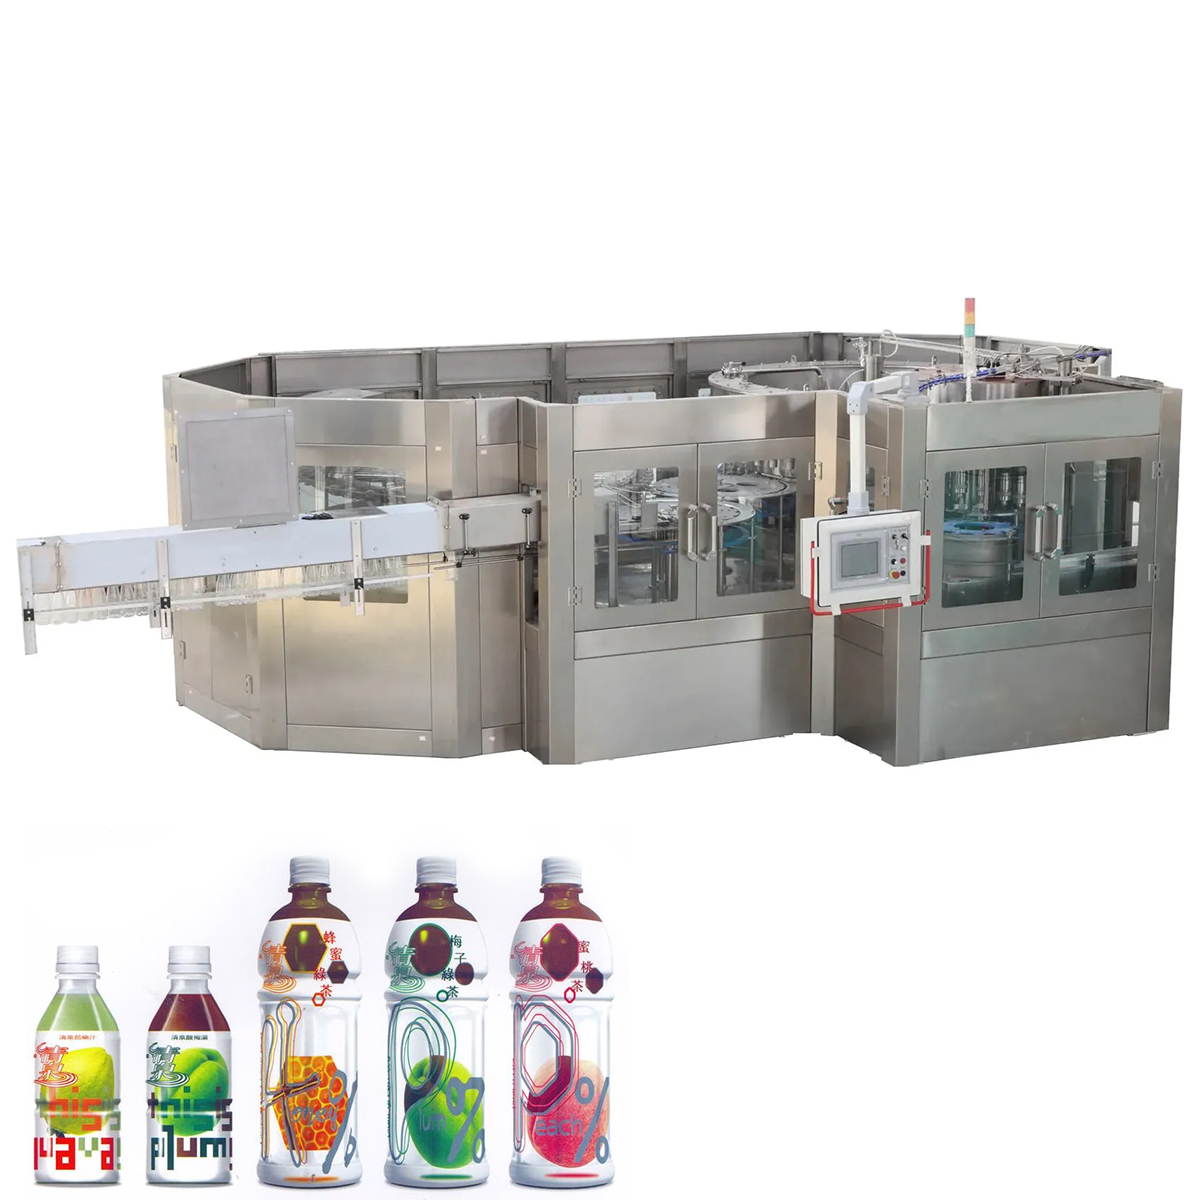 Beverage Filling Machine Prices: Balancing Cost and Value